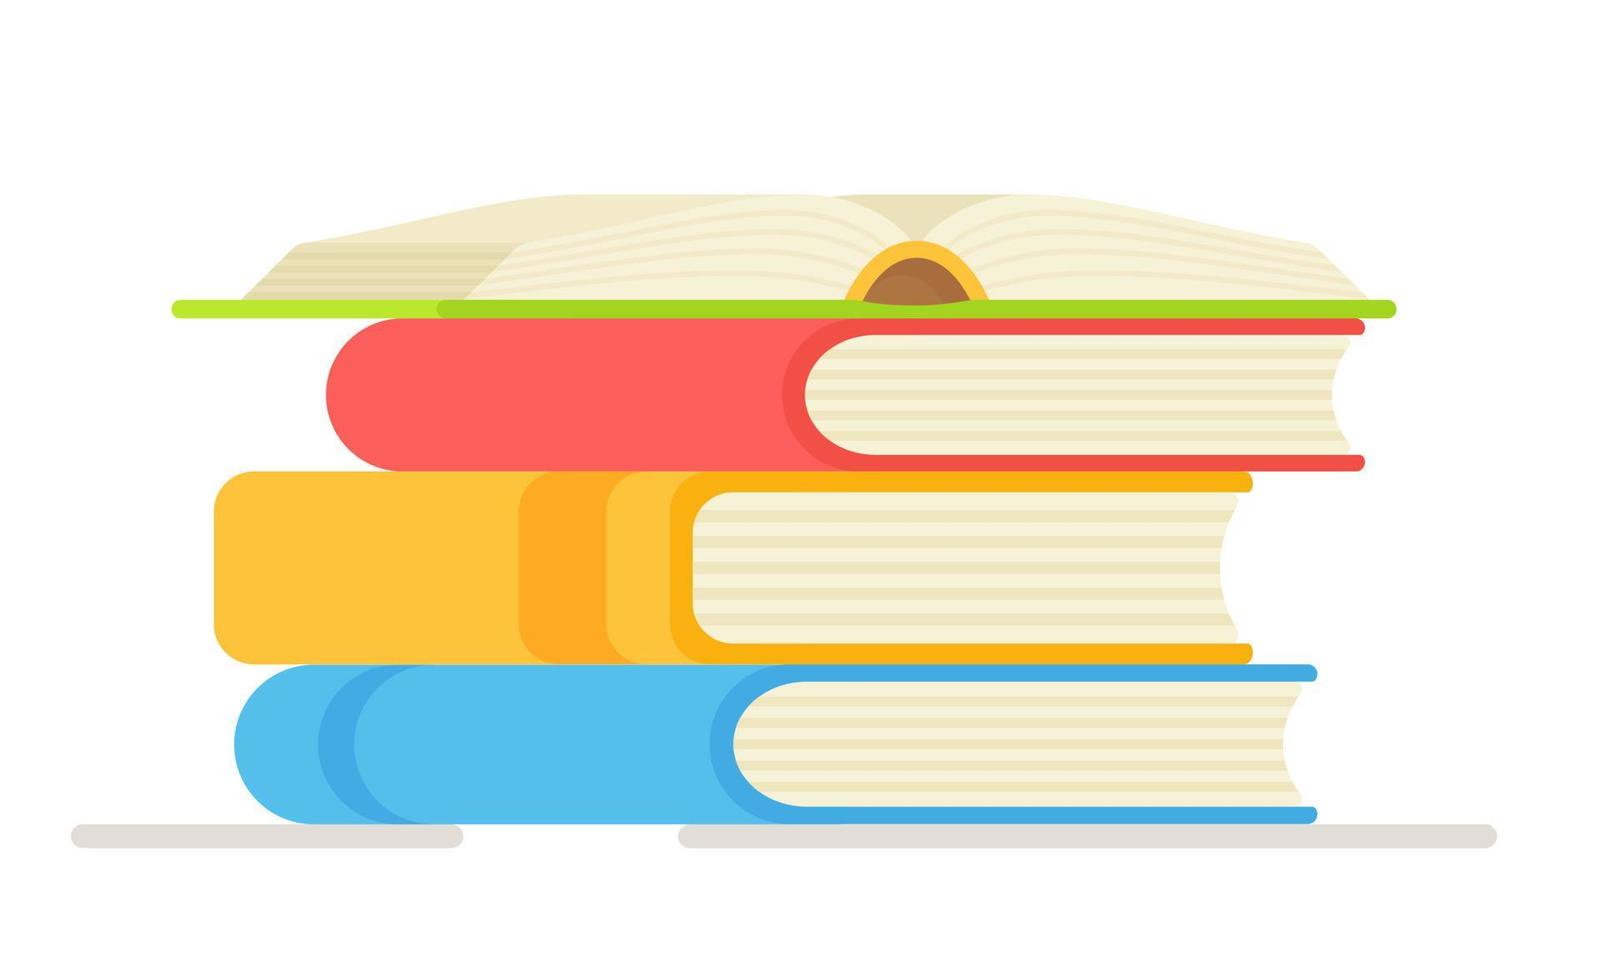 Vector illustration of a stack of books on a white background. Open book on red cover and stack.